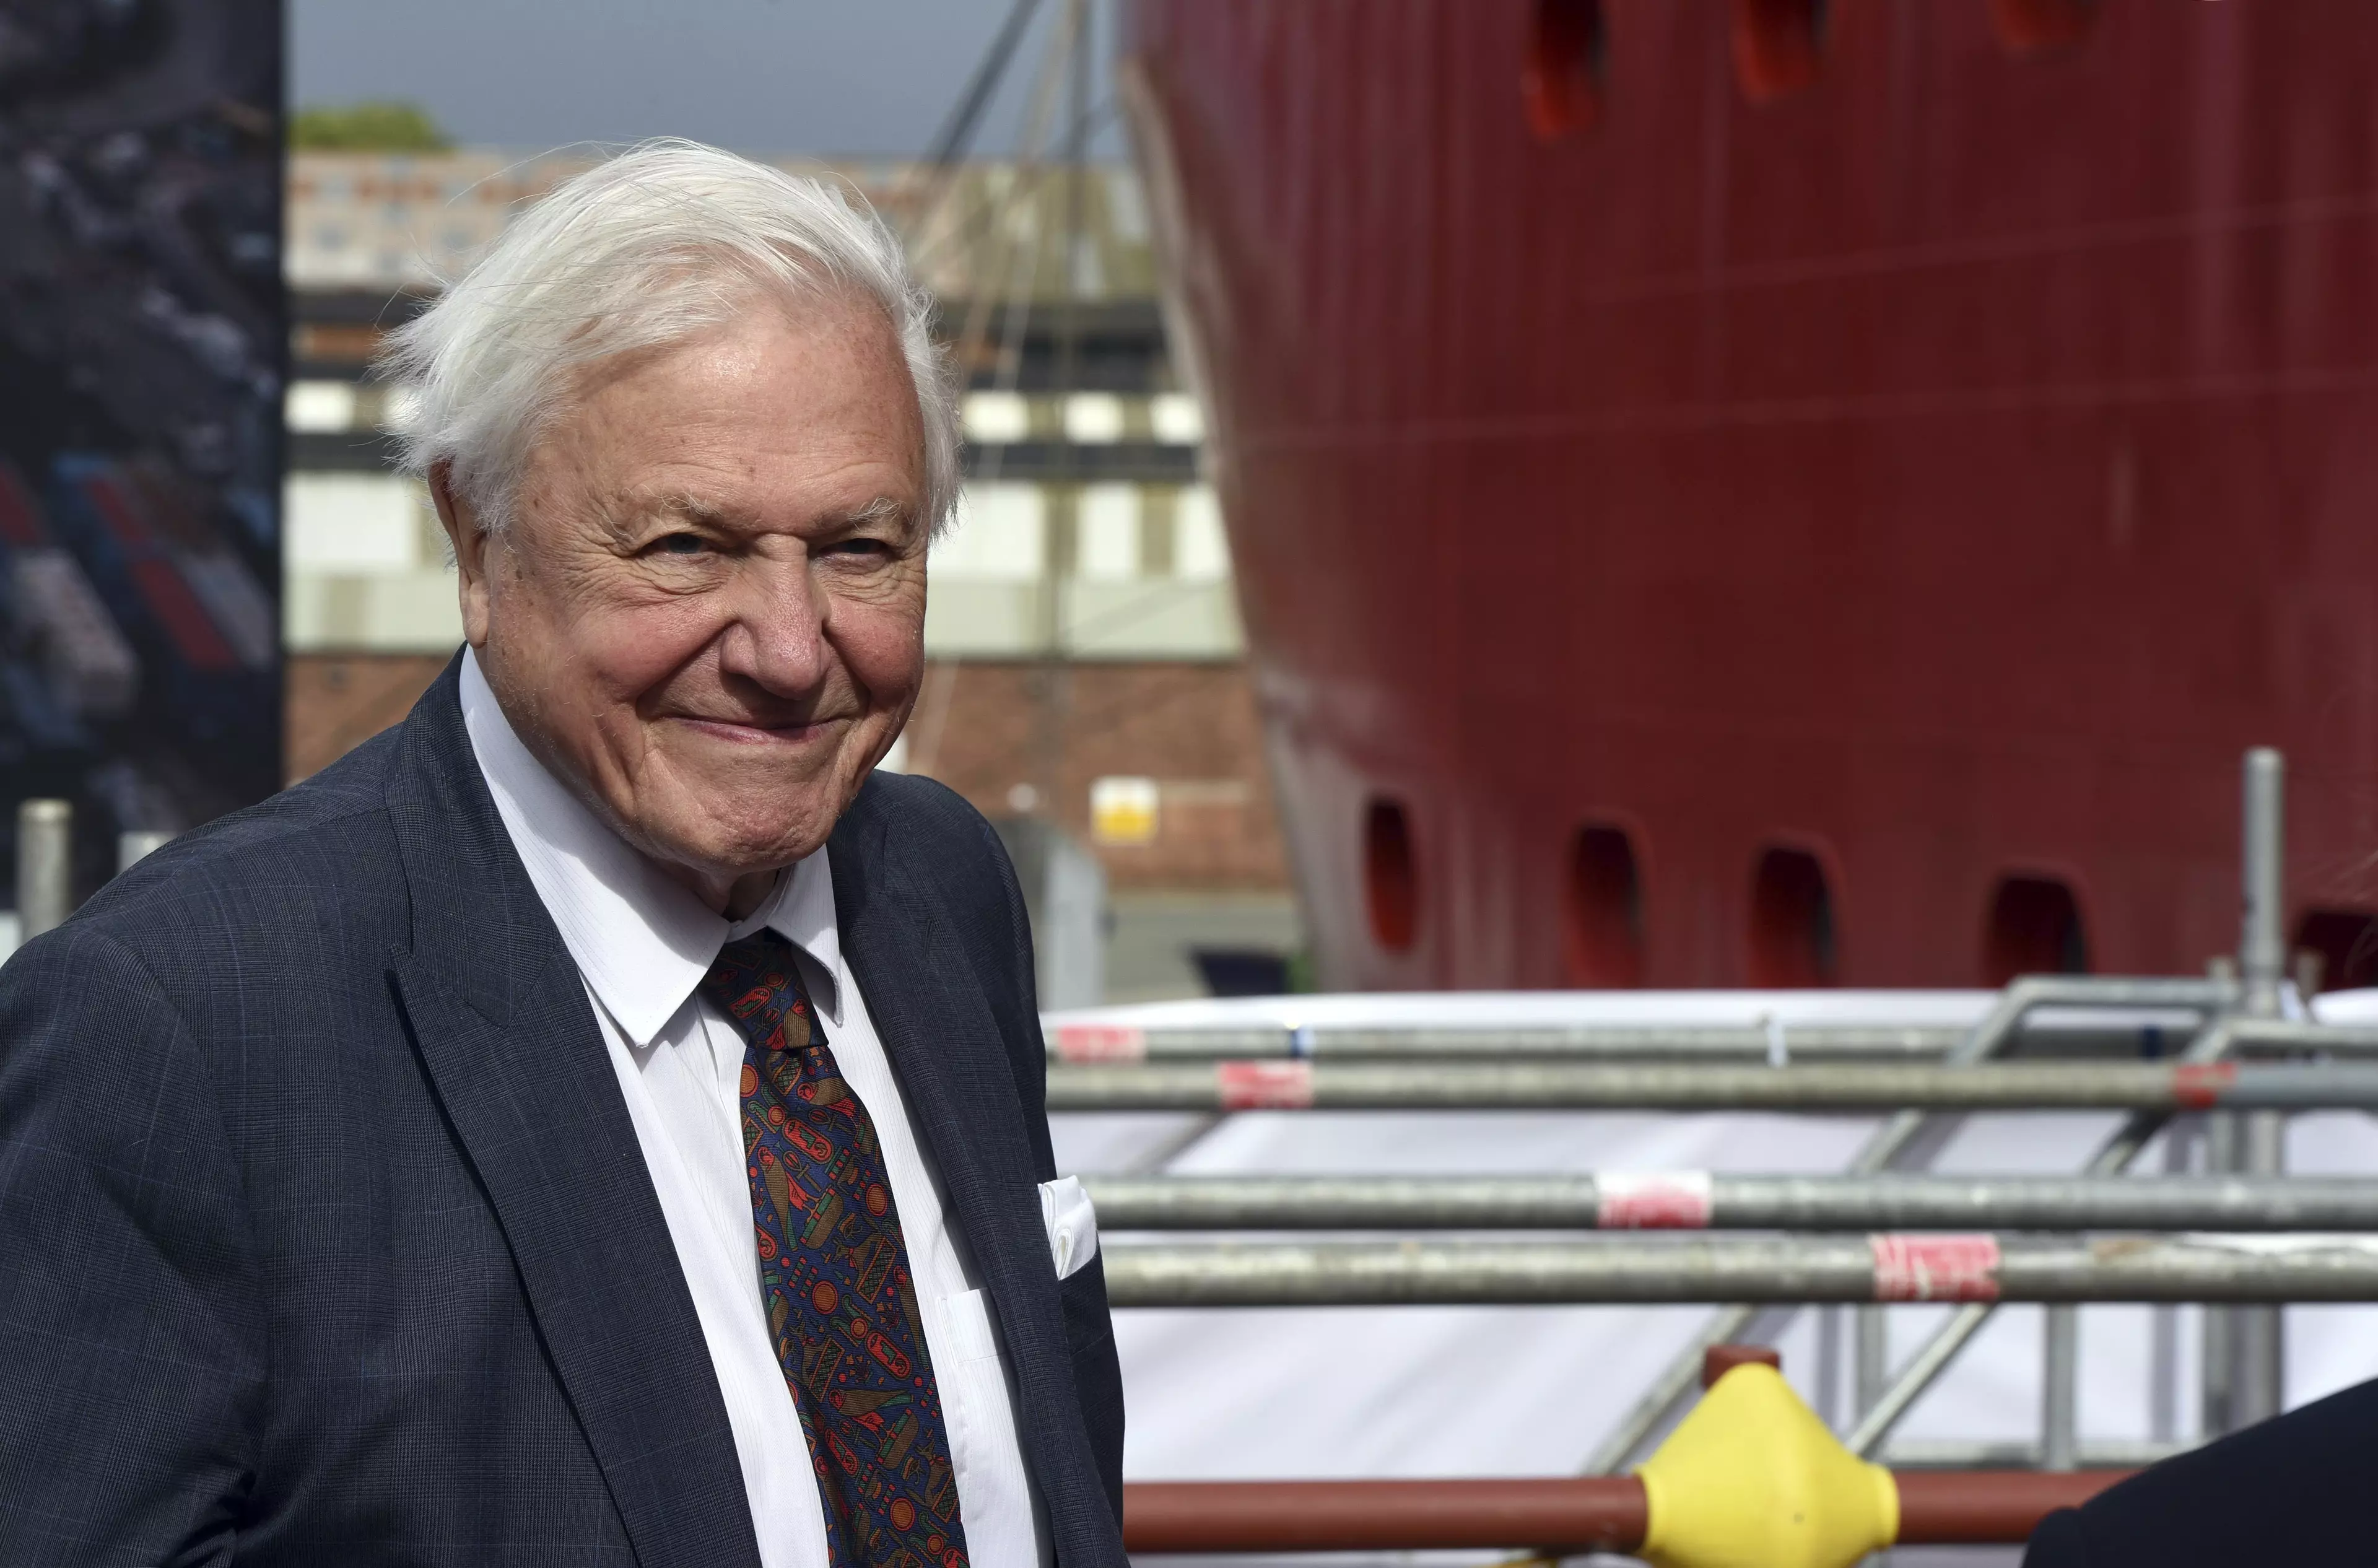 Sir David will be back on BBC Two in 2021.